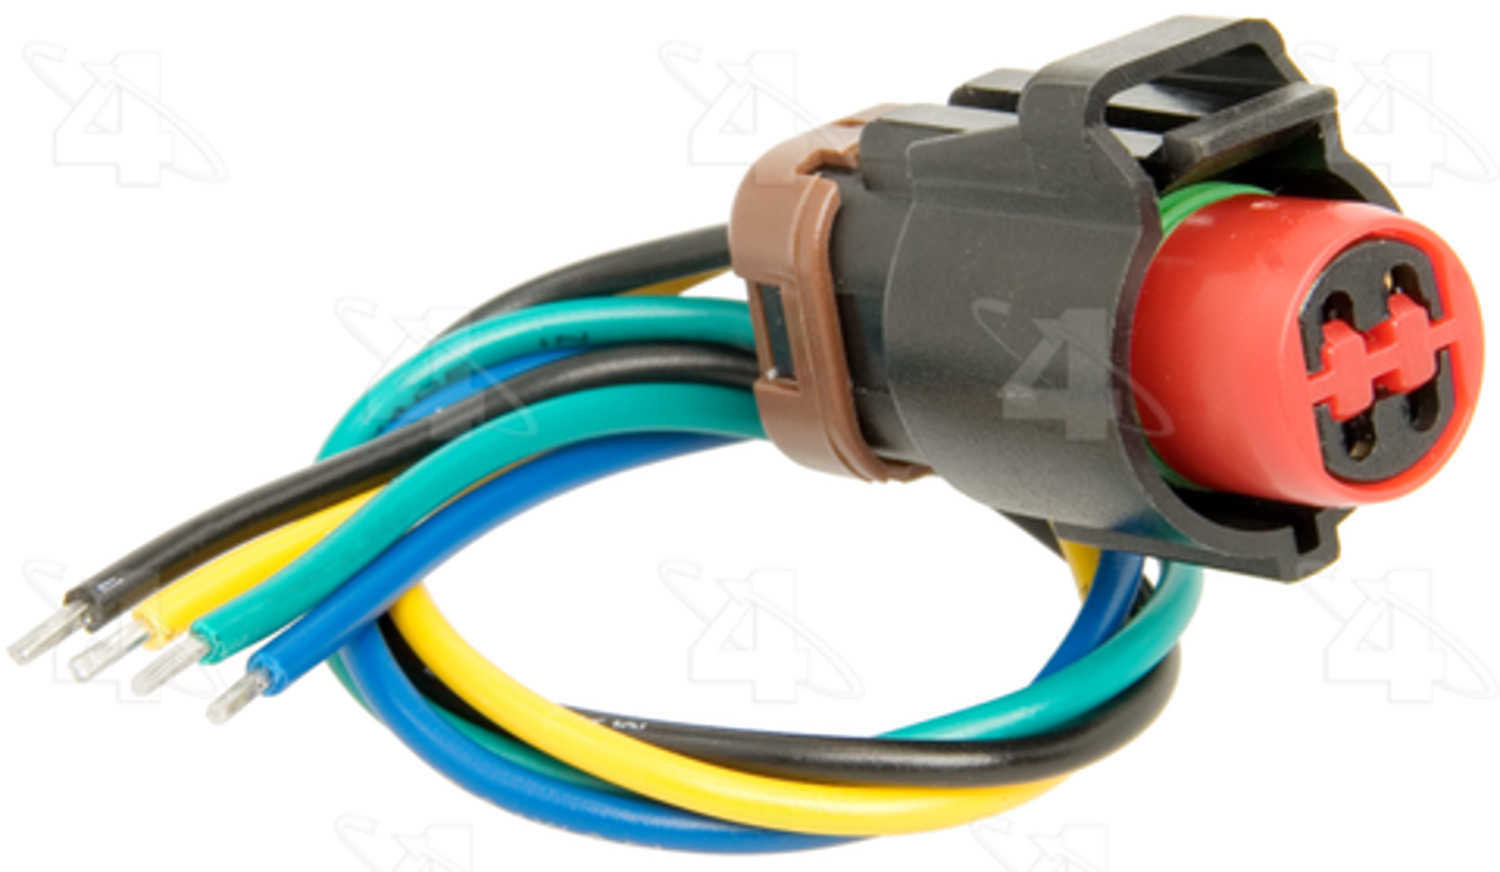 FOUR SEASONS - A/C Clutch Cycle Switch Connector - FSE 37235